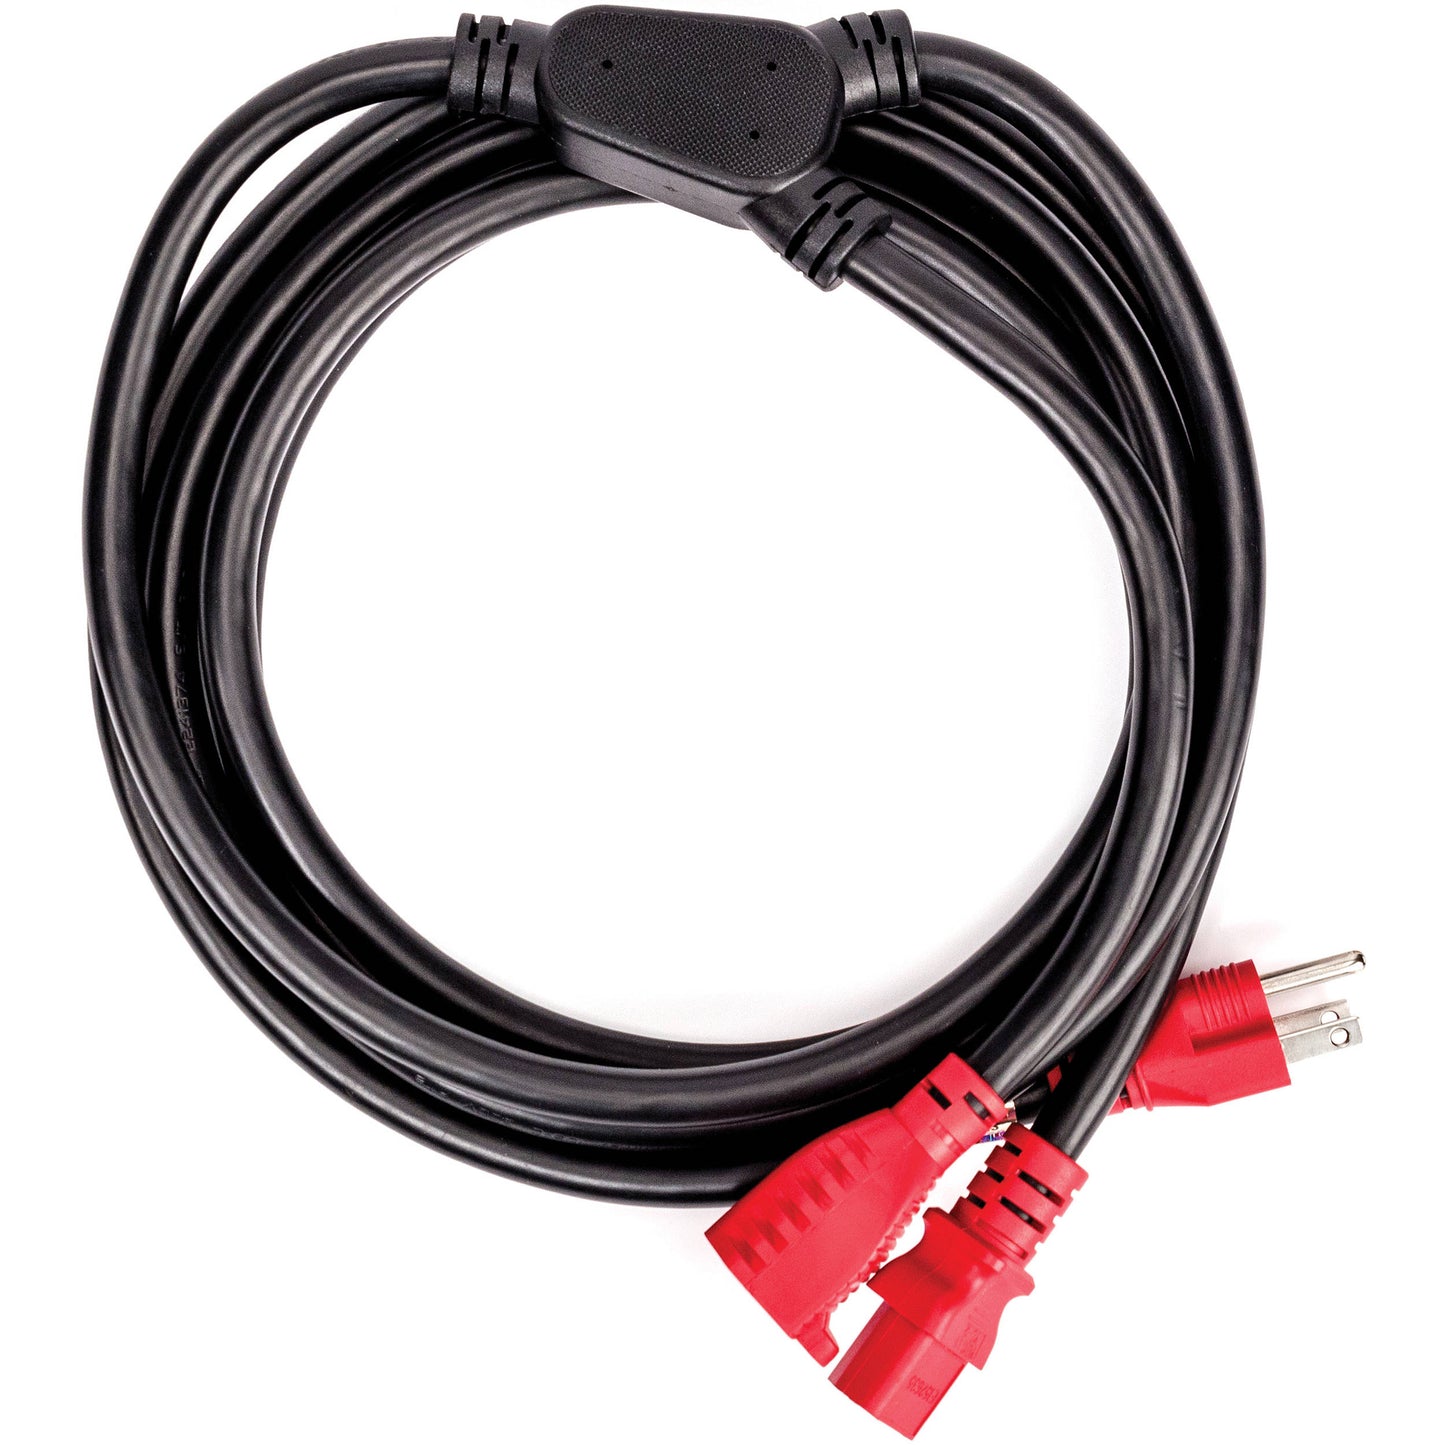 D'Addario IECB Amplifier Power Cable (Power Cable+ With Integrated Extra Outlet)